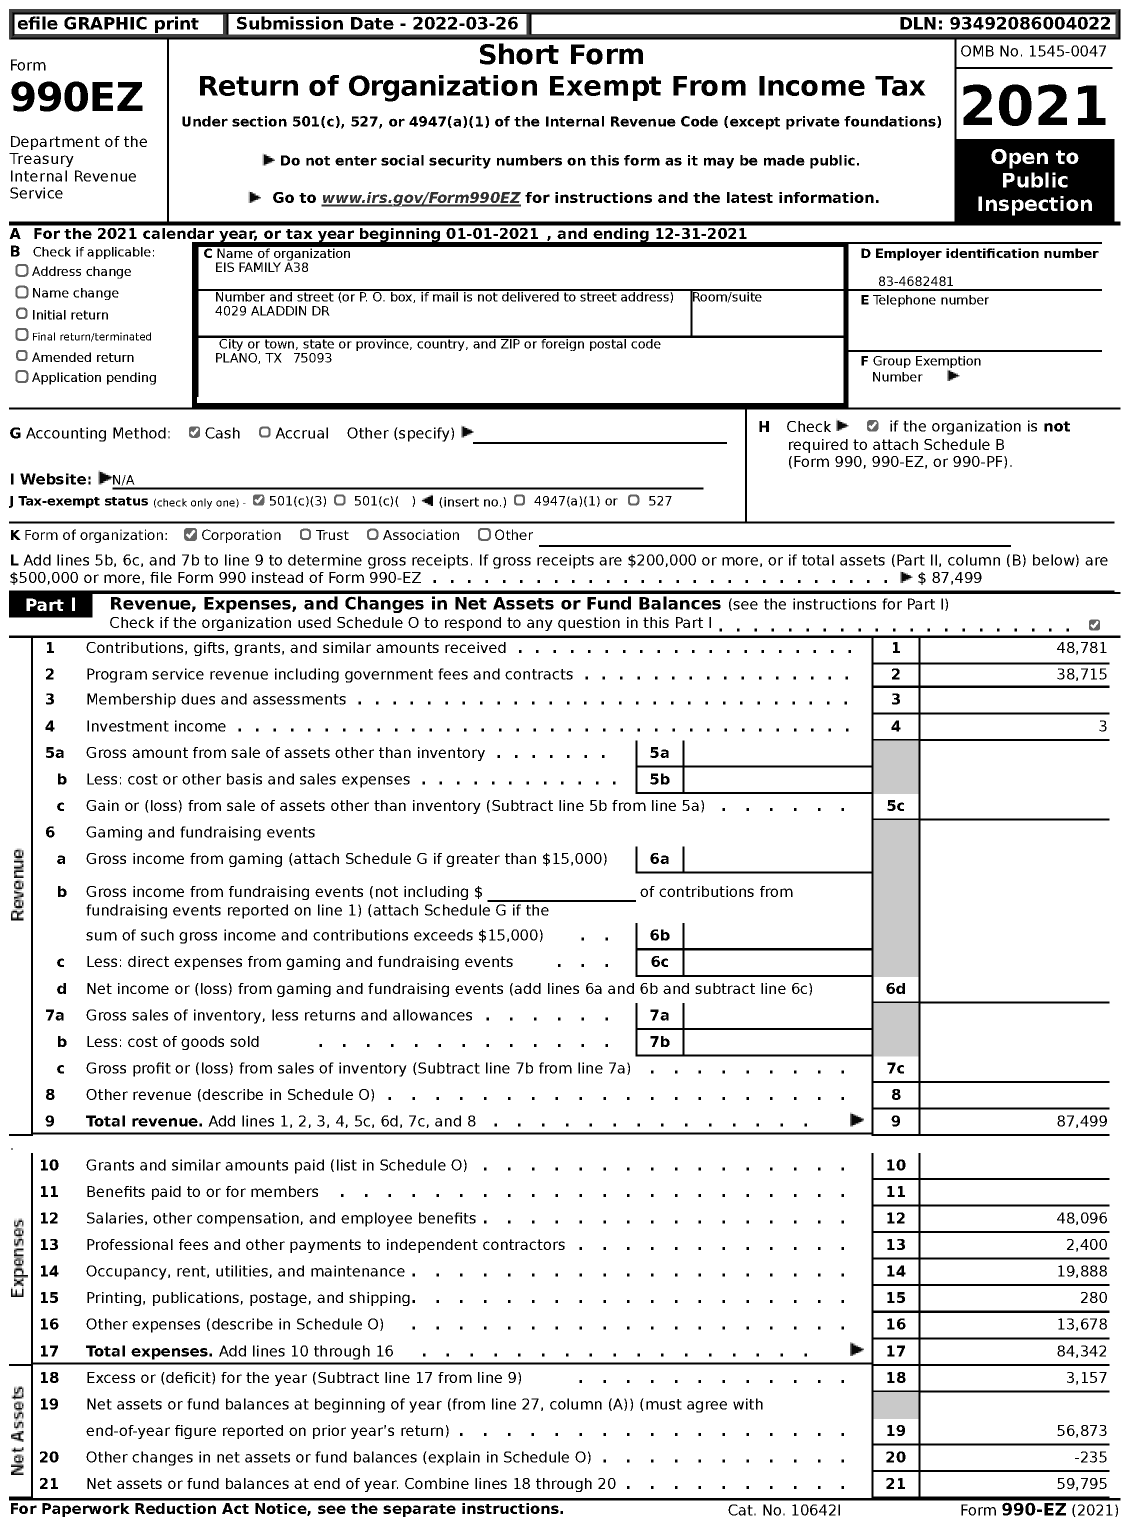 Image of first page of 2021 Form 990EZ for Eis Family A38